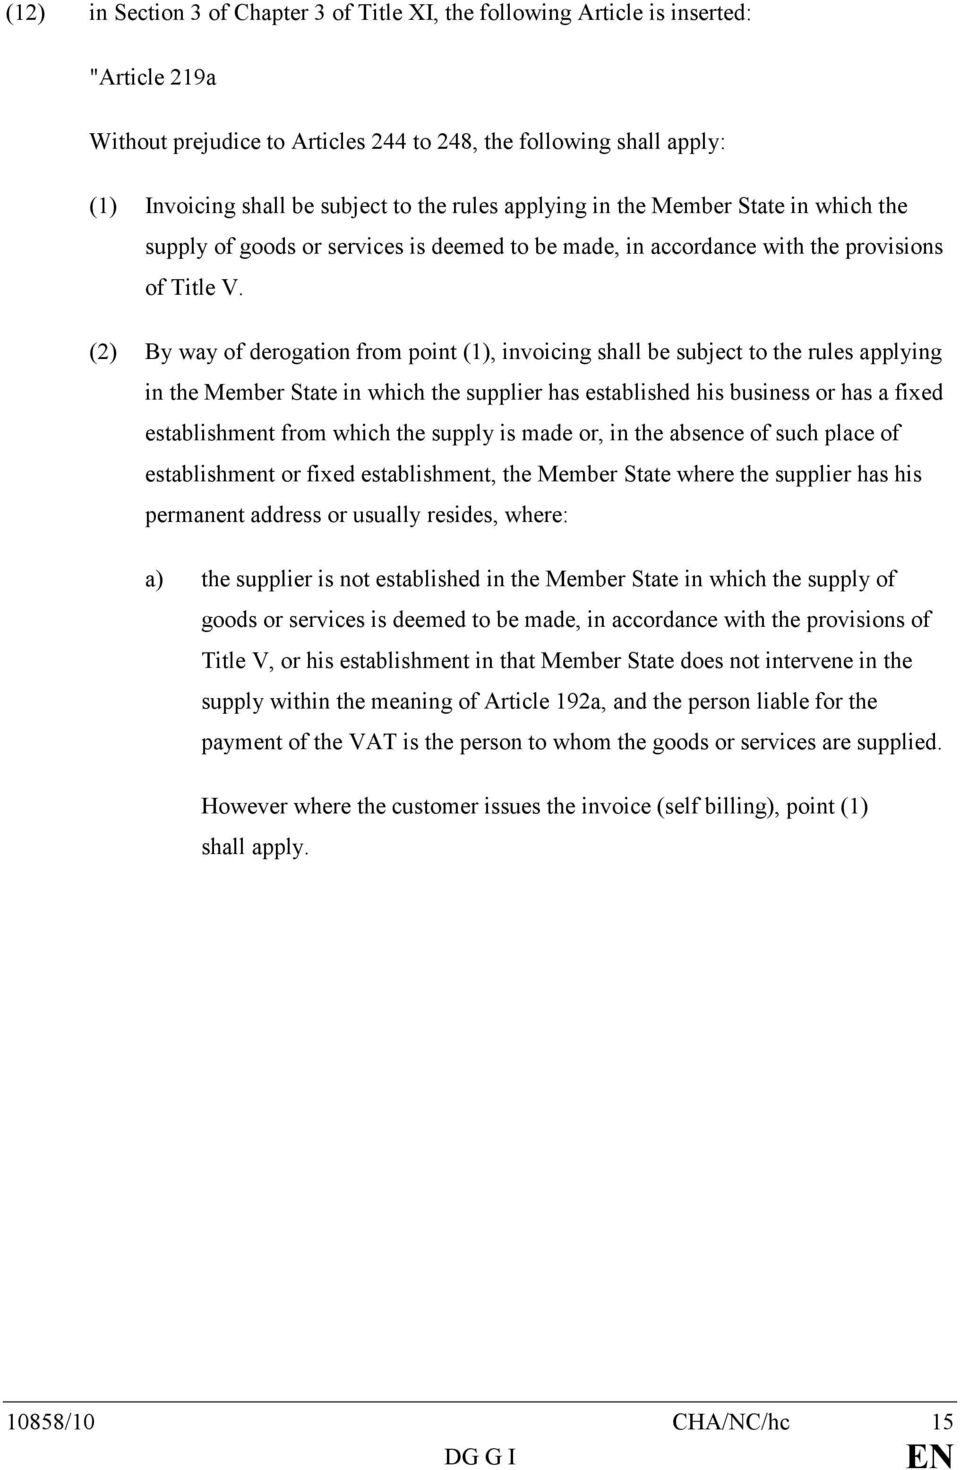 (2) By way of derogation from point (1), invoicing shall be subject to the rules applying in the Member State in which the supplier has established his business or has a fixed establishment from